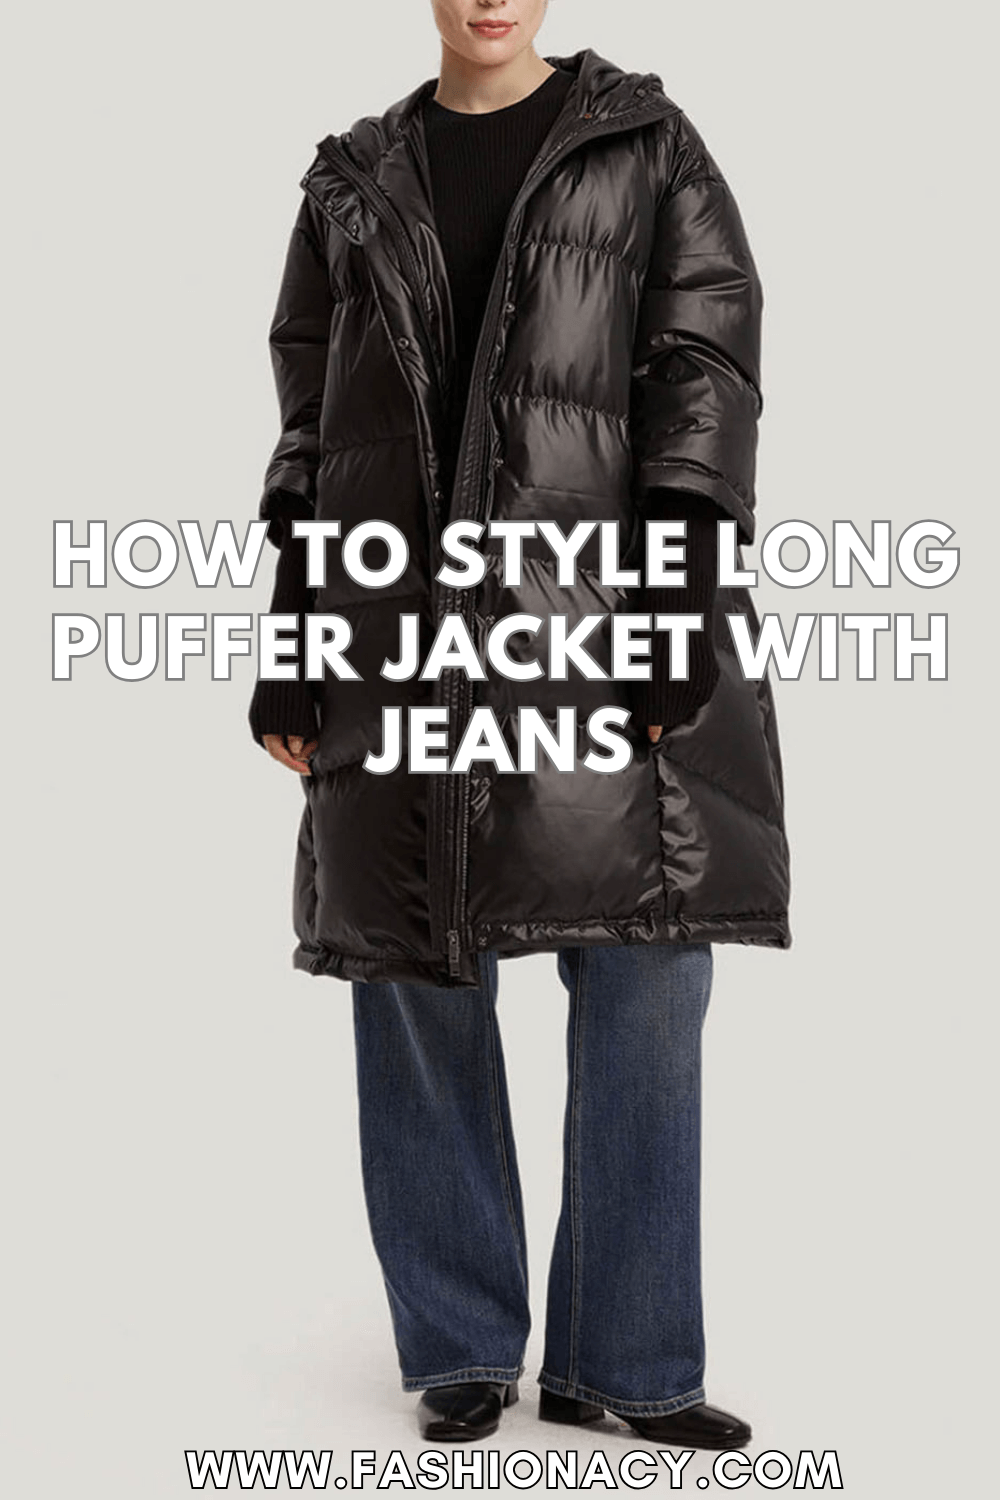 How to Style Long Puffer Jacket